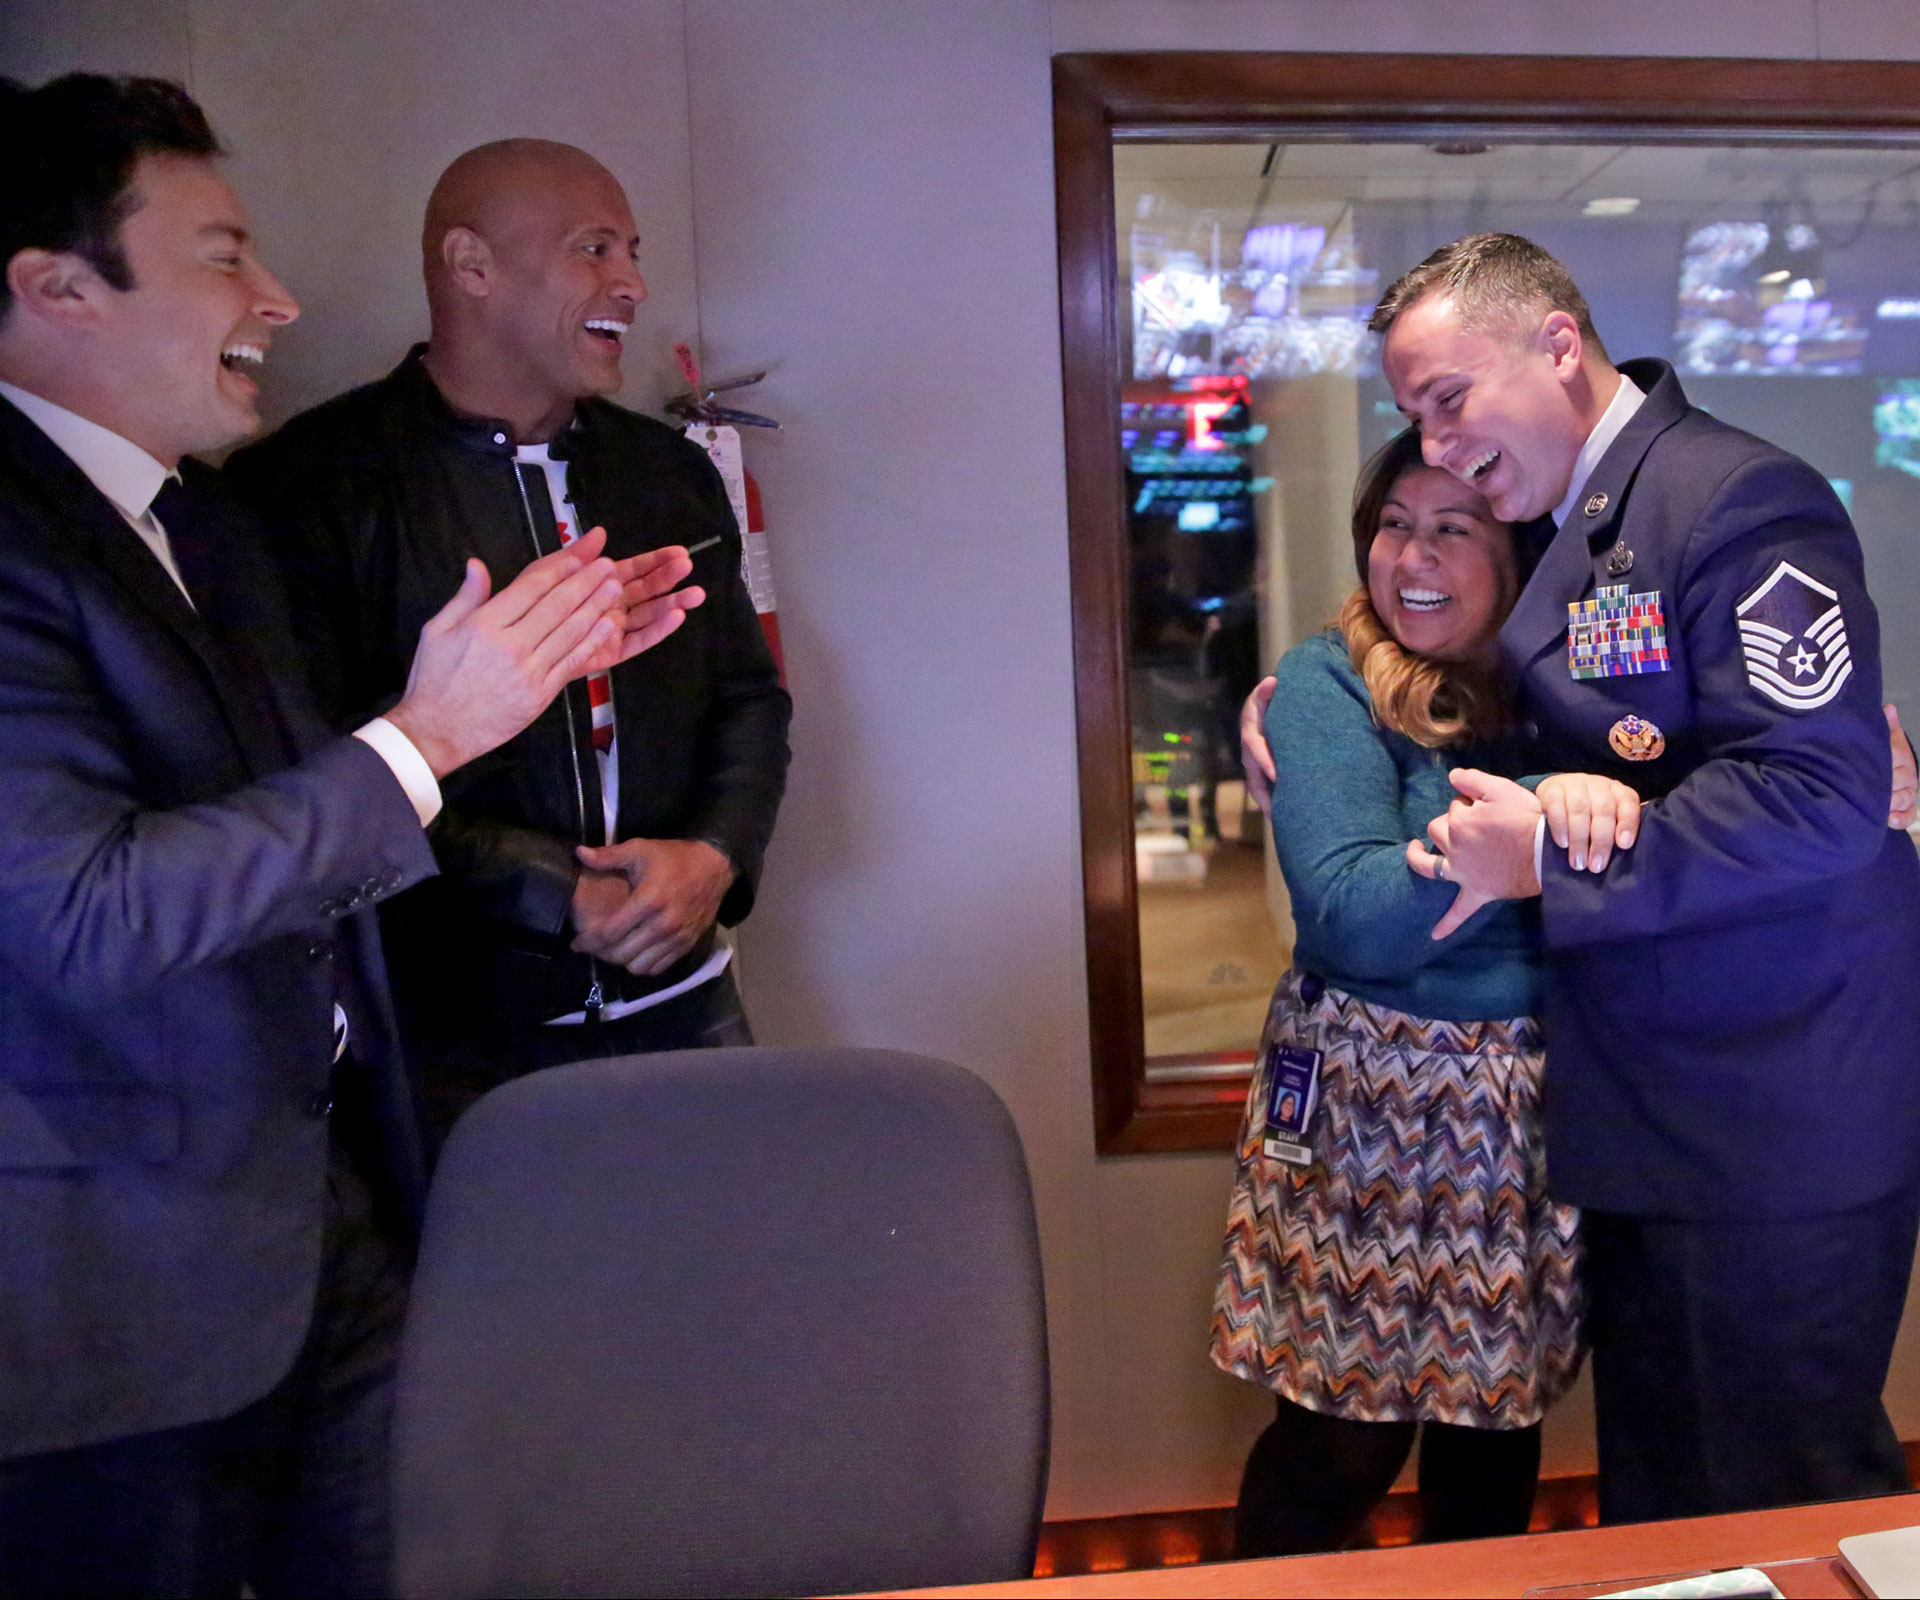 Dwayne ‘The Rock’ Johnson and Jimmy Fallon orchestrate emotional reunion for a military couple